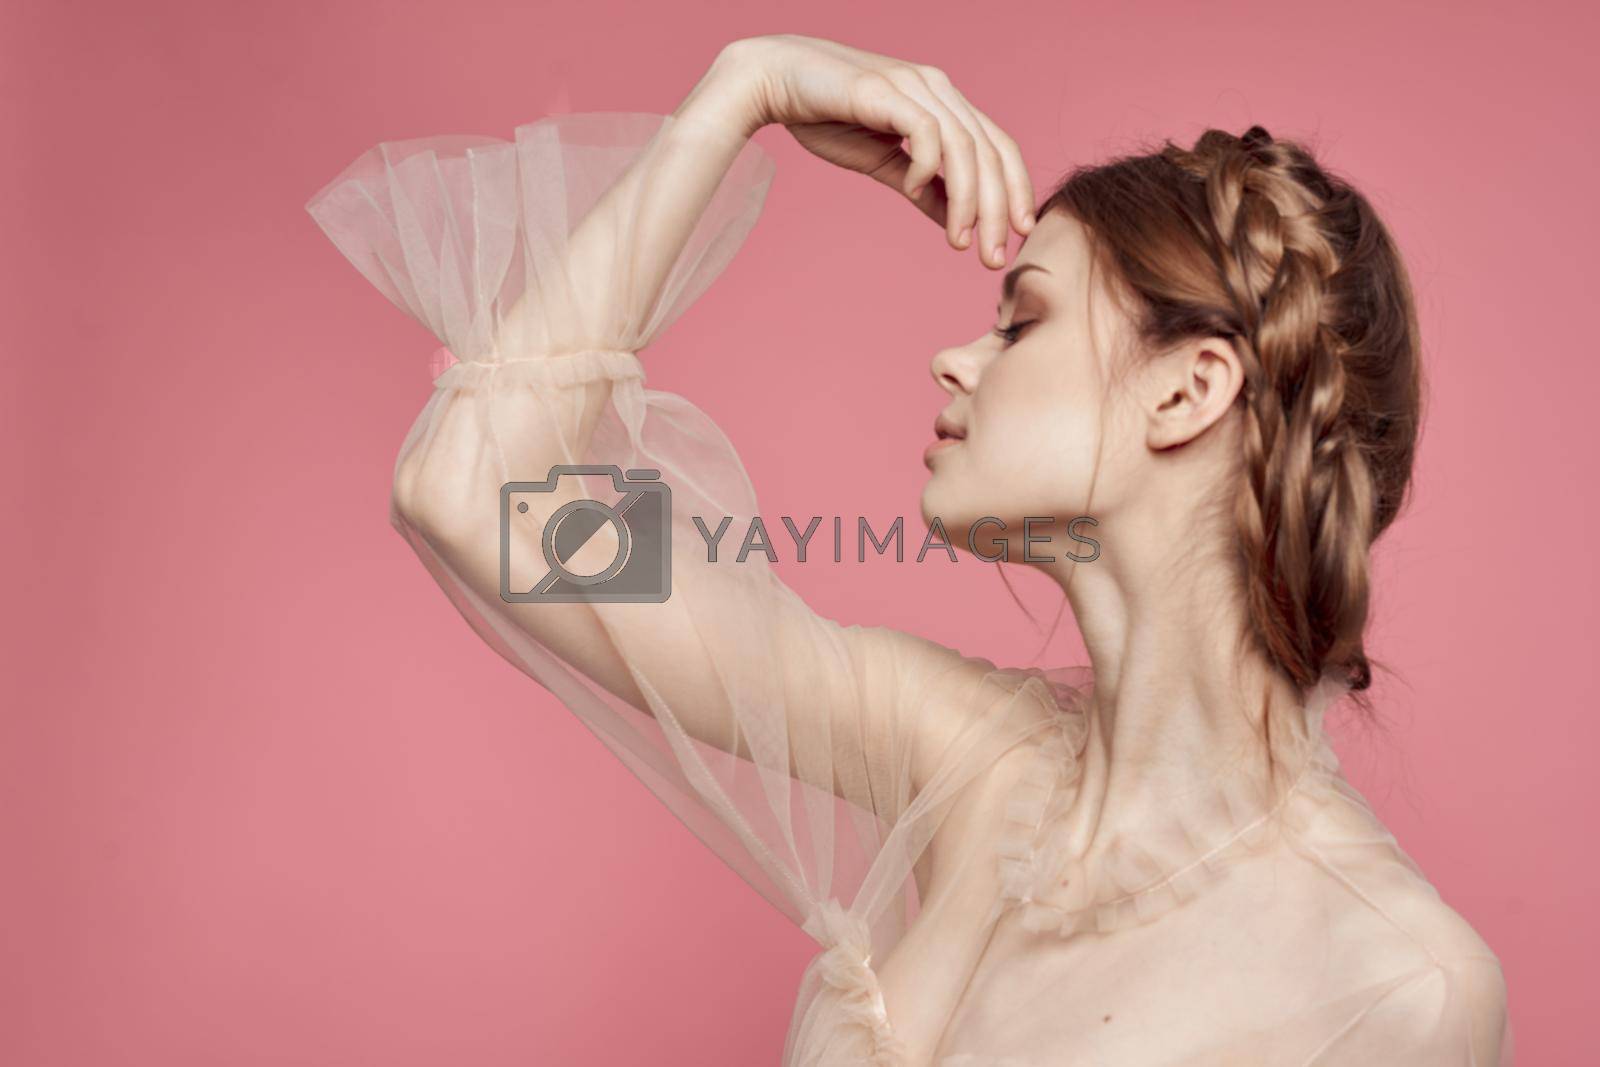 cheerful woman attractive look lifestyle romance pink background. High quality photo